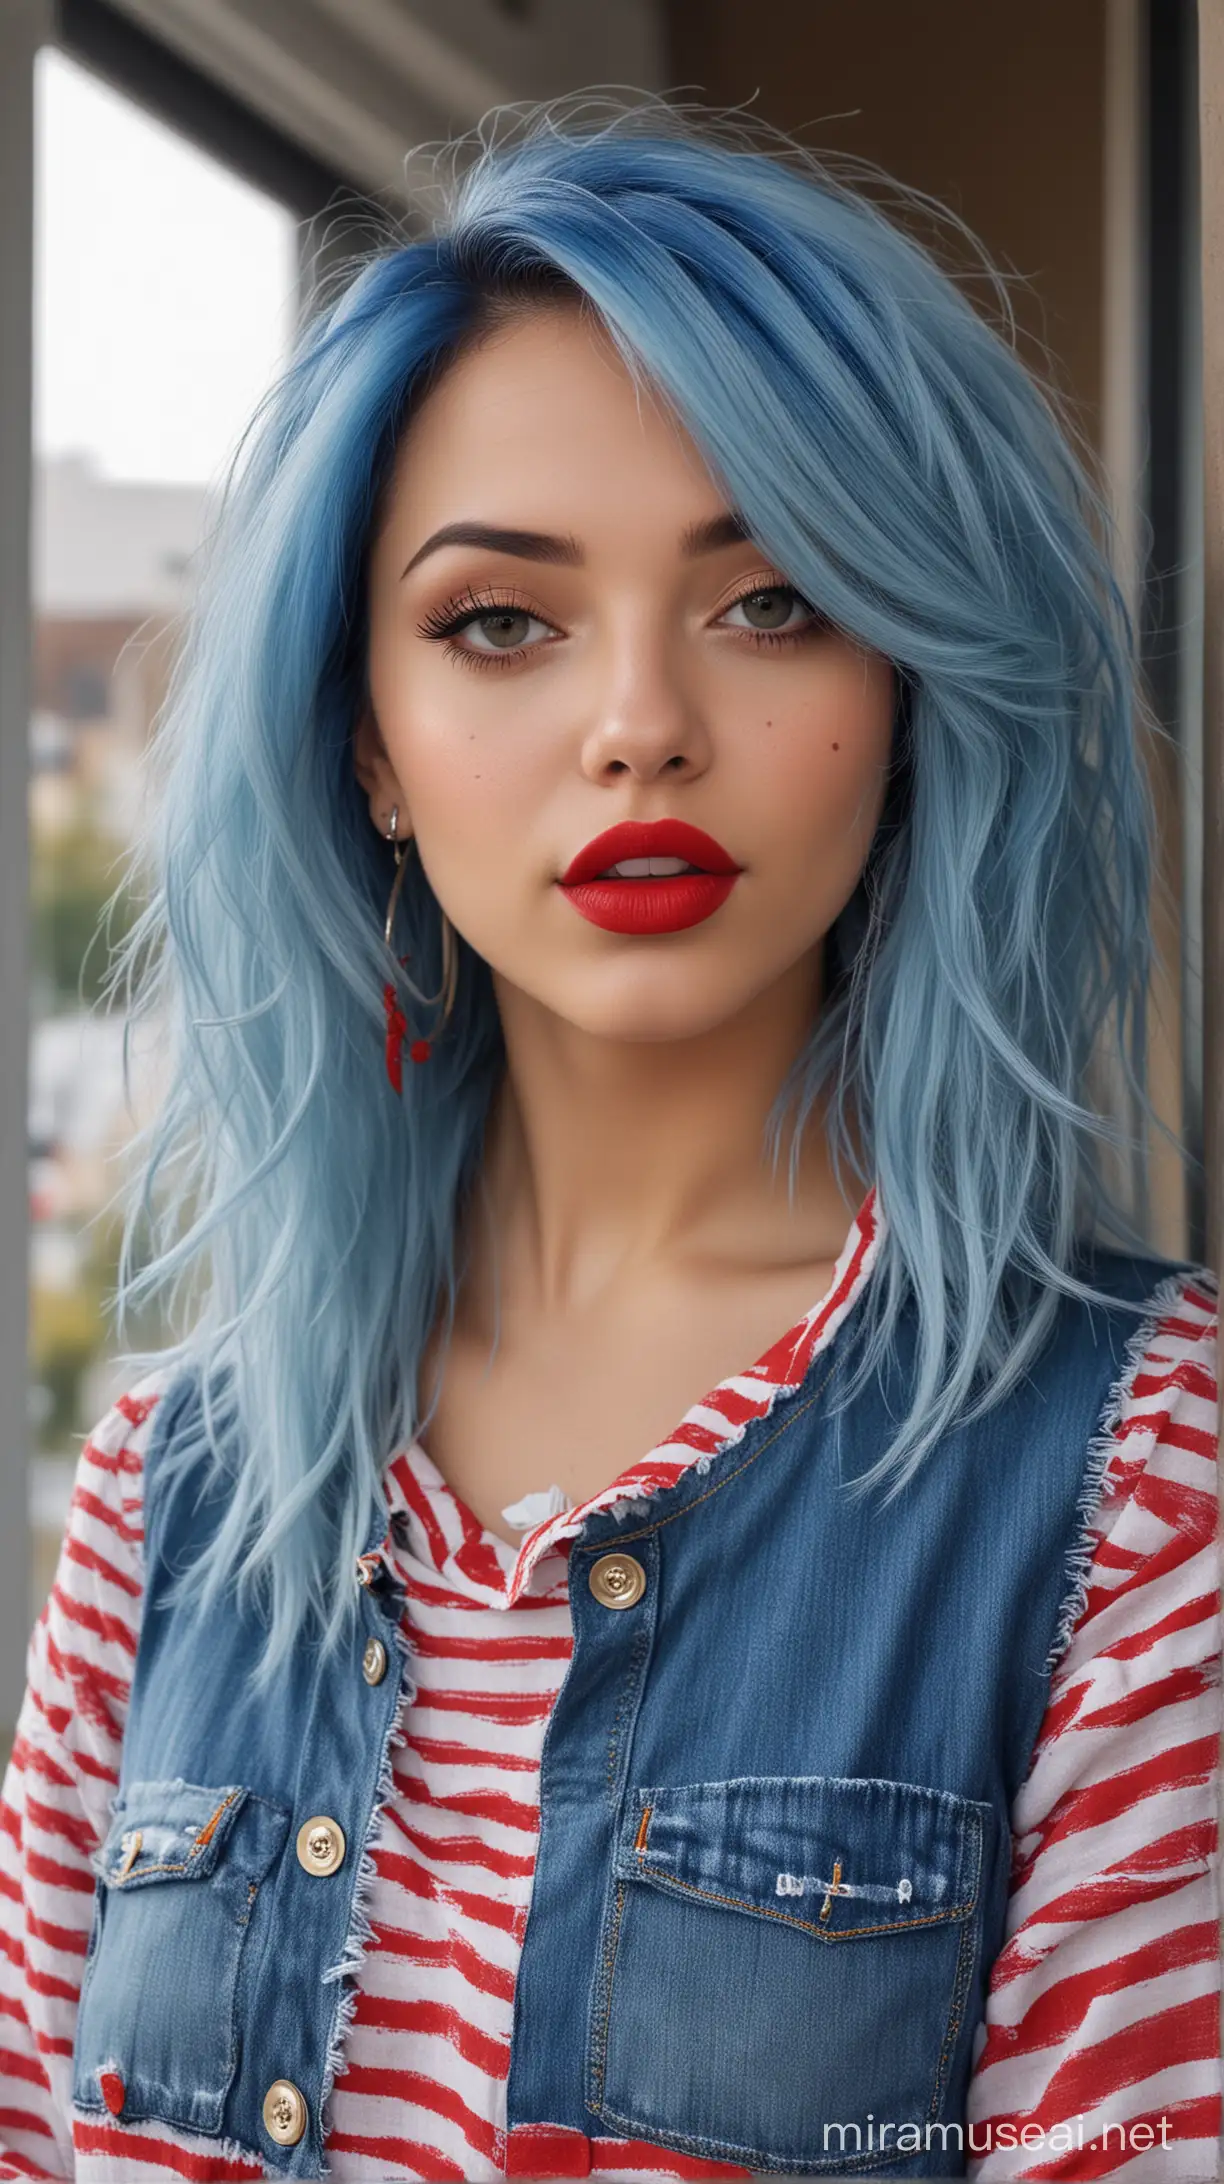 Stylish USA Girl with Blue Hair and Red Lipstick Looking out of Home Window